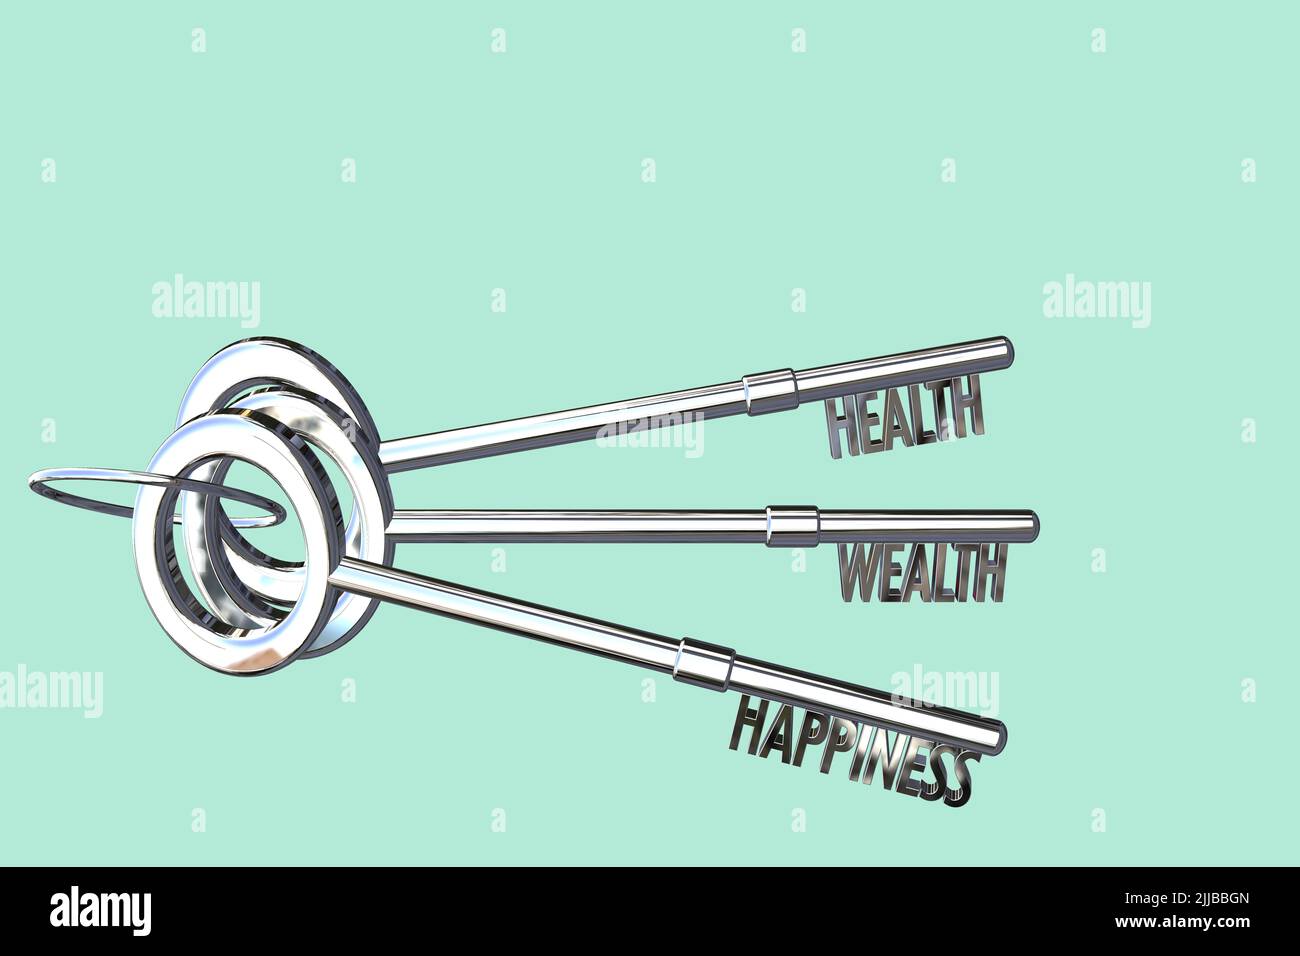 key to health concept key to wealth concept key to happiness concept health wealth & happiness isolated mint green background Stock Photo